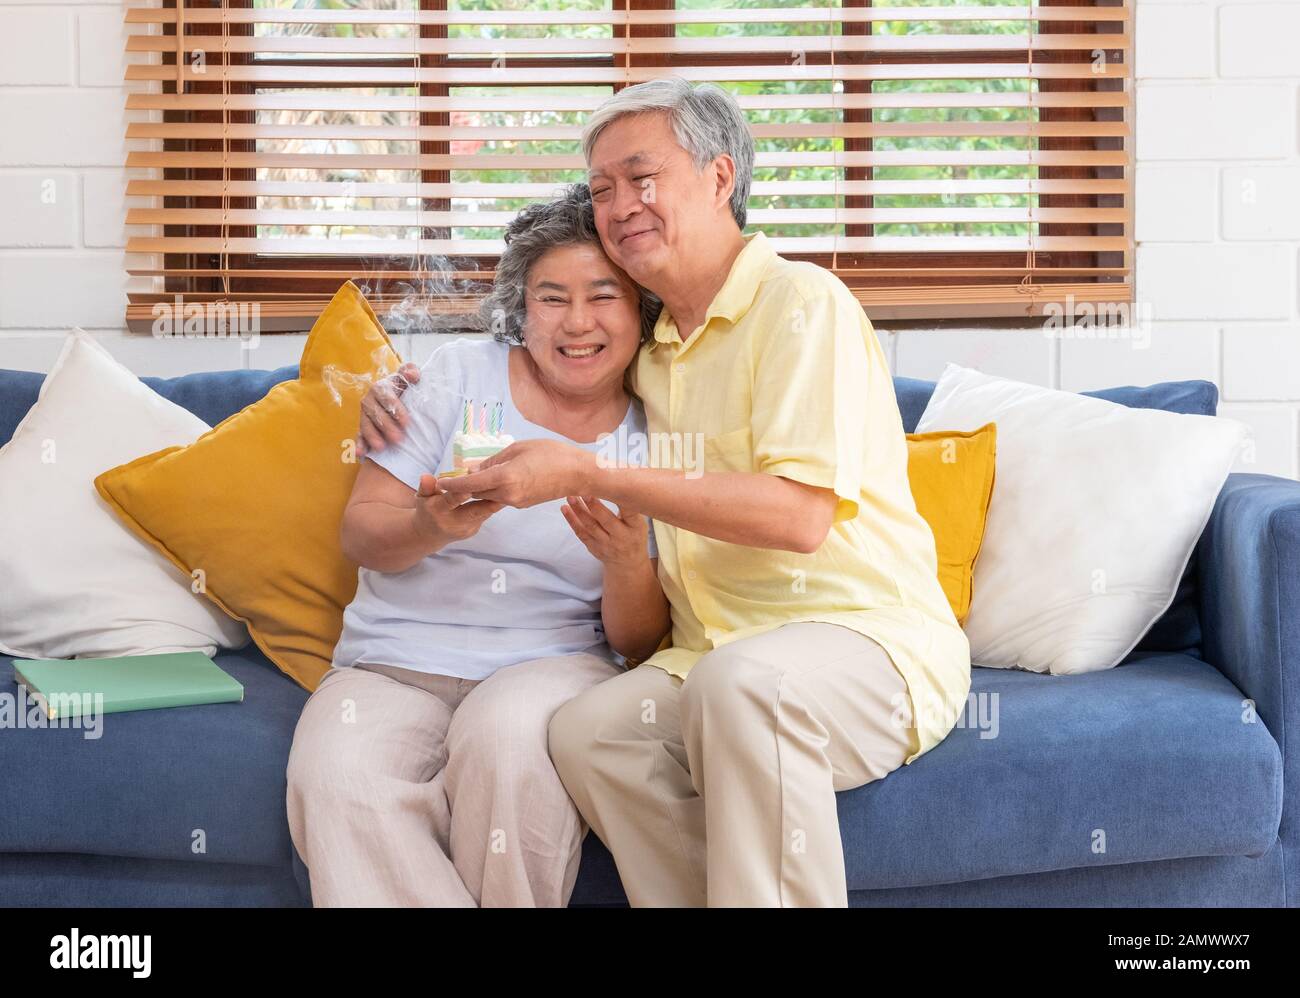 asian senior man surprise senior woman with birthday cake in living room at home.aging at home concept. Stock Photo